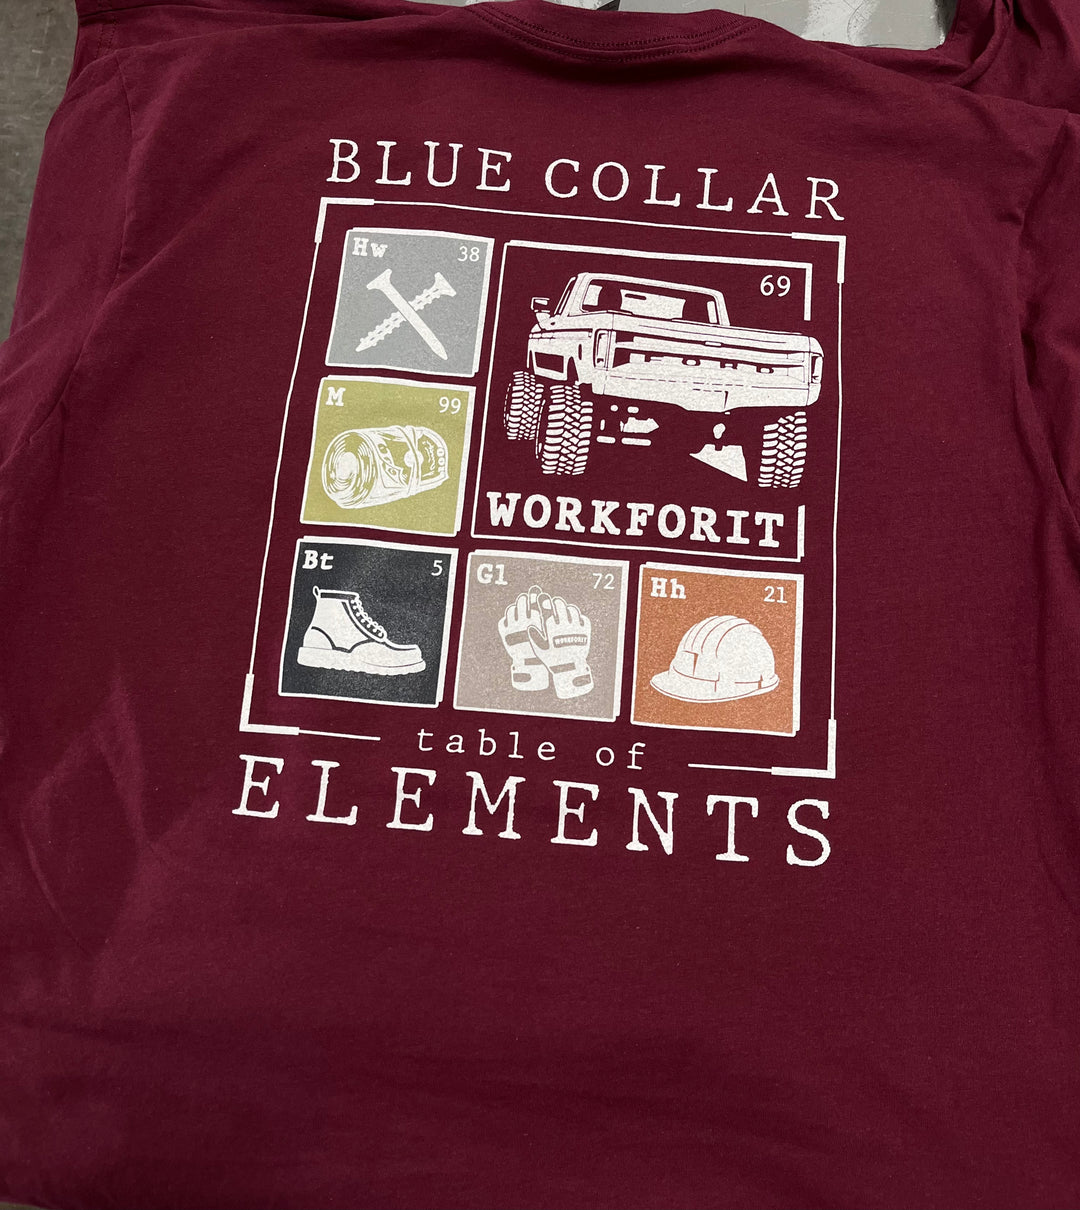 Table Of Elements T-Shirt